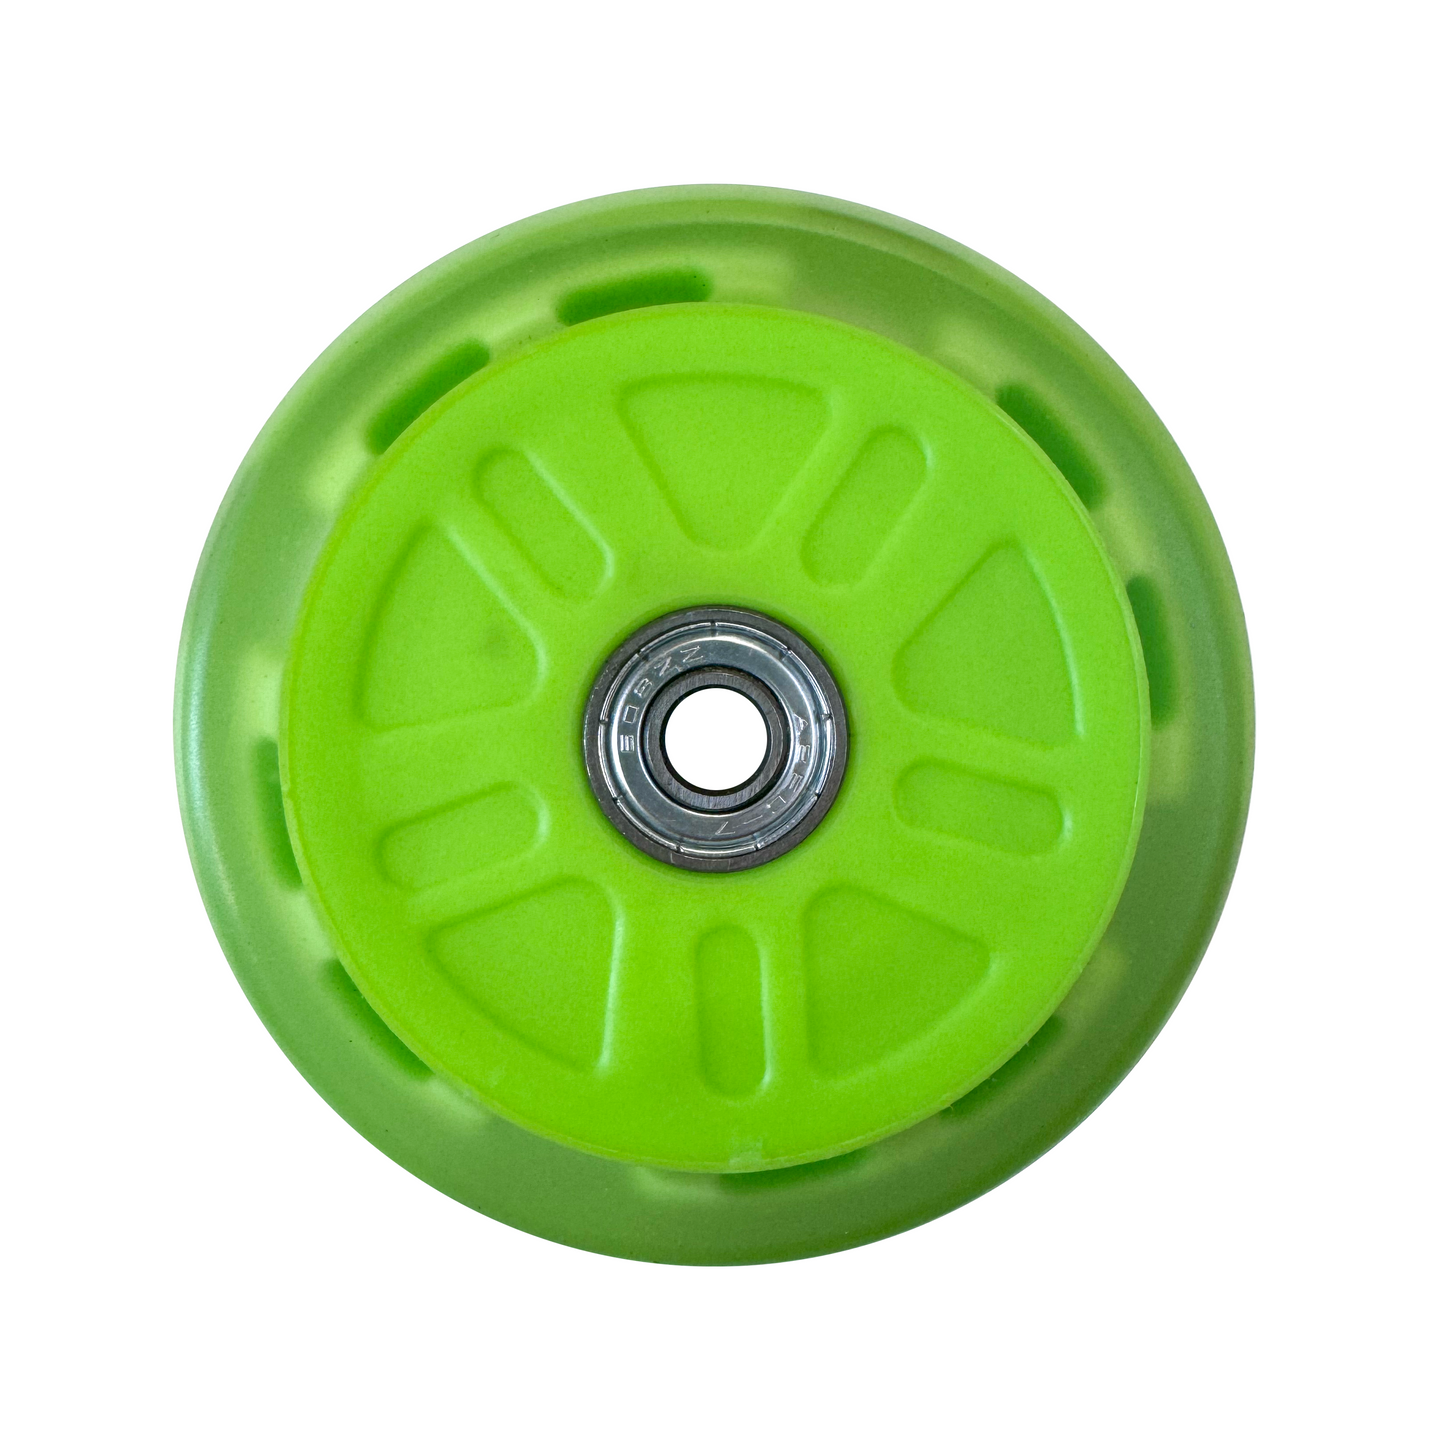 Replacement-Wheel-Back-Small-Green-Trunki-Scooter-image1